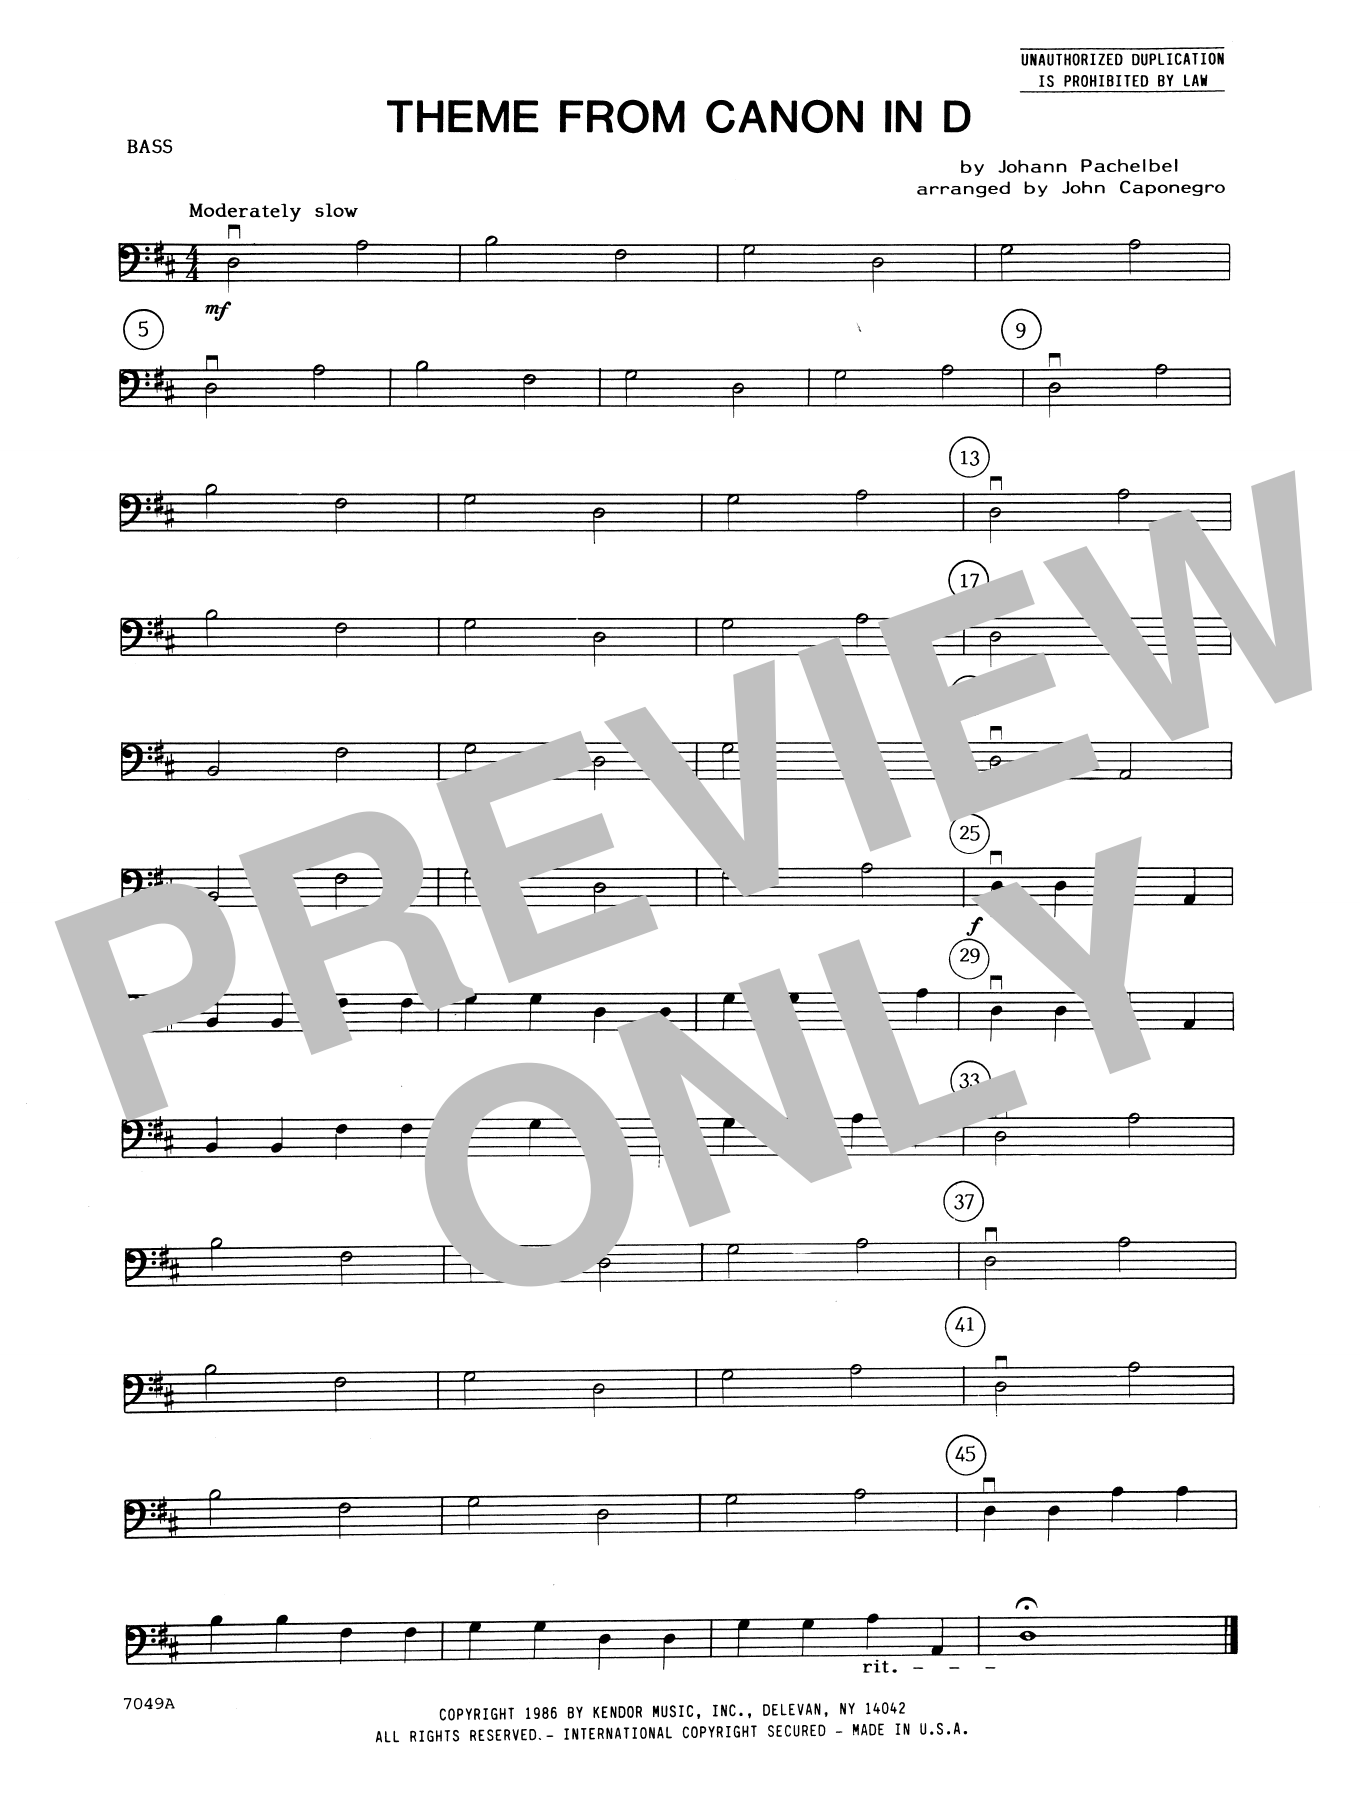 Download John Caponegro Theme From Canon In D - Bass Sheet Music